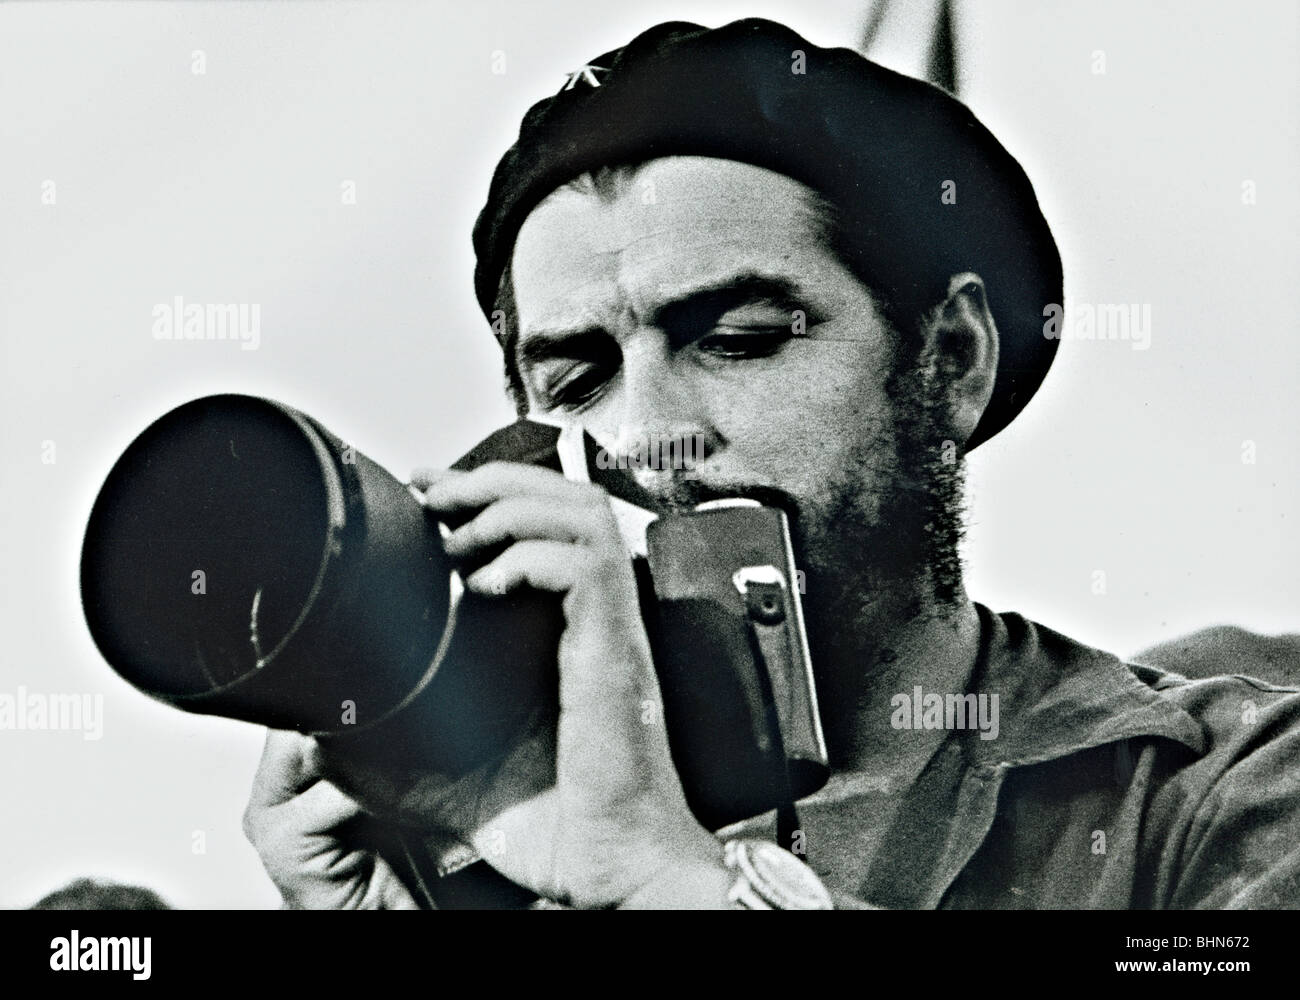 Che-Guevara-Camera-Rolex - photographer unkown, I am off to…